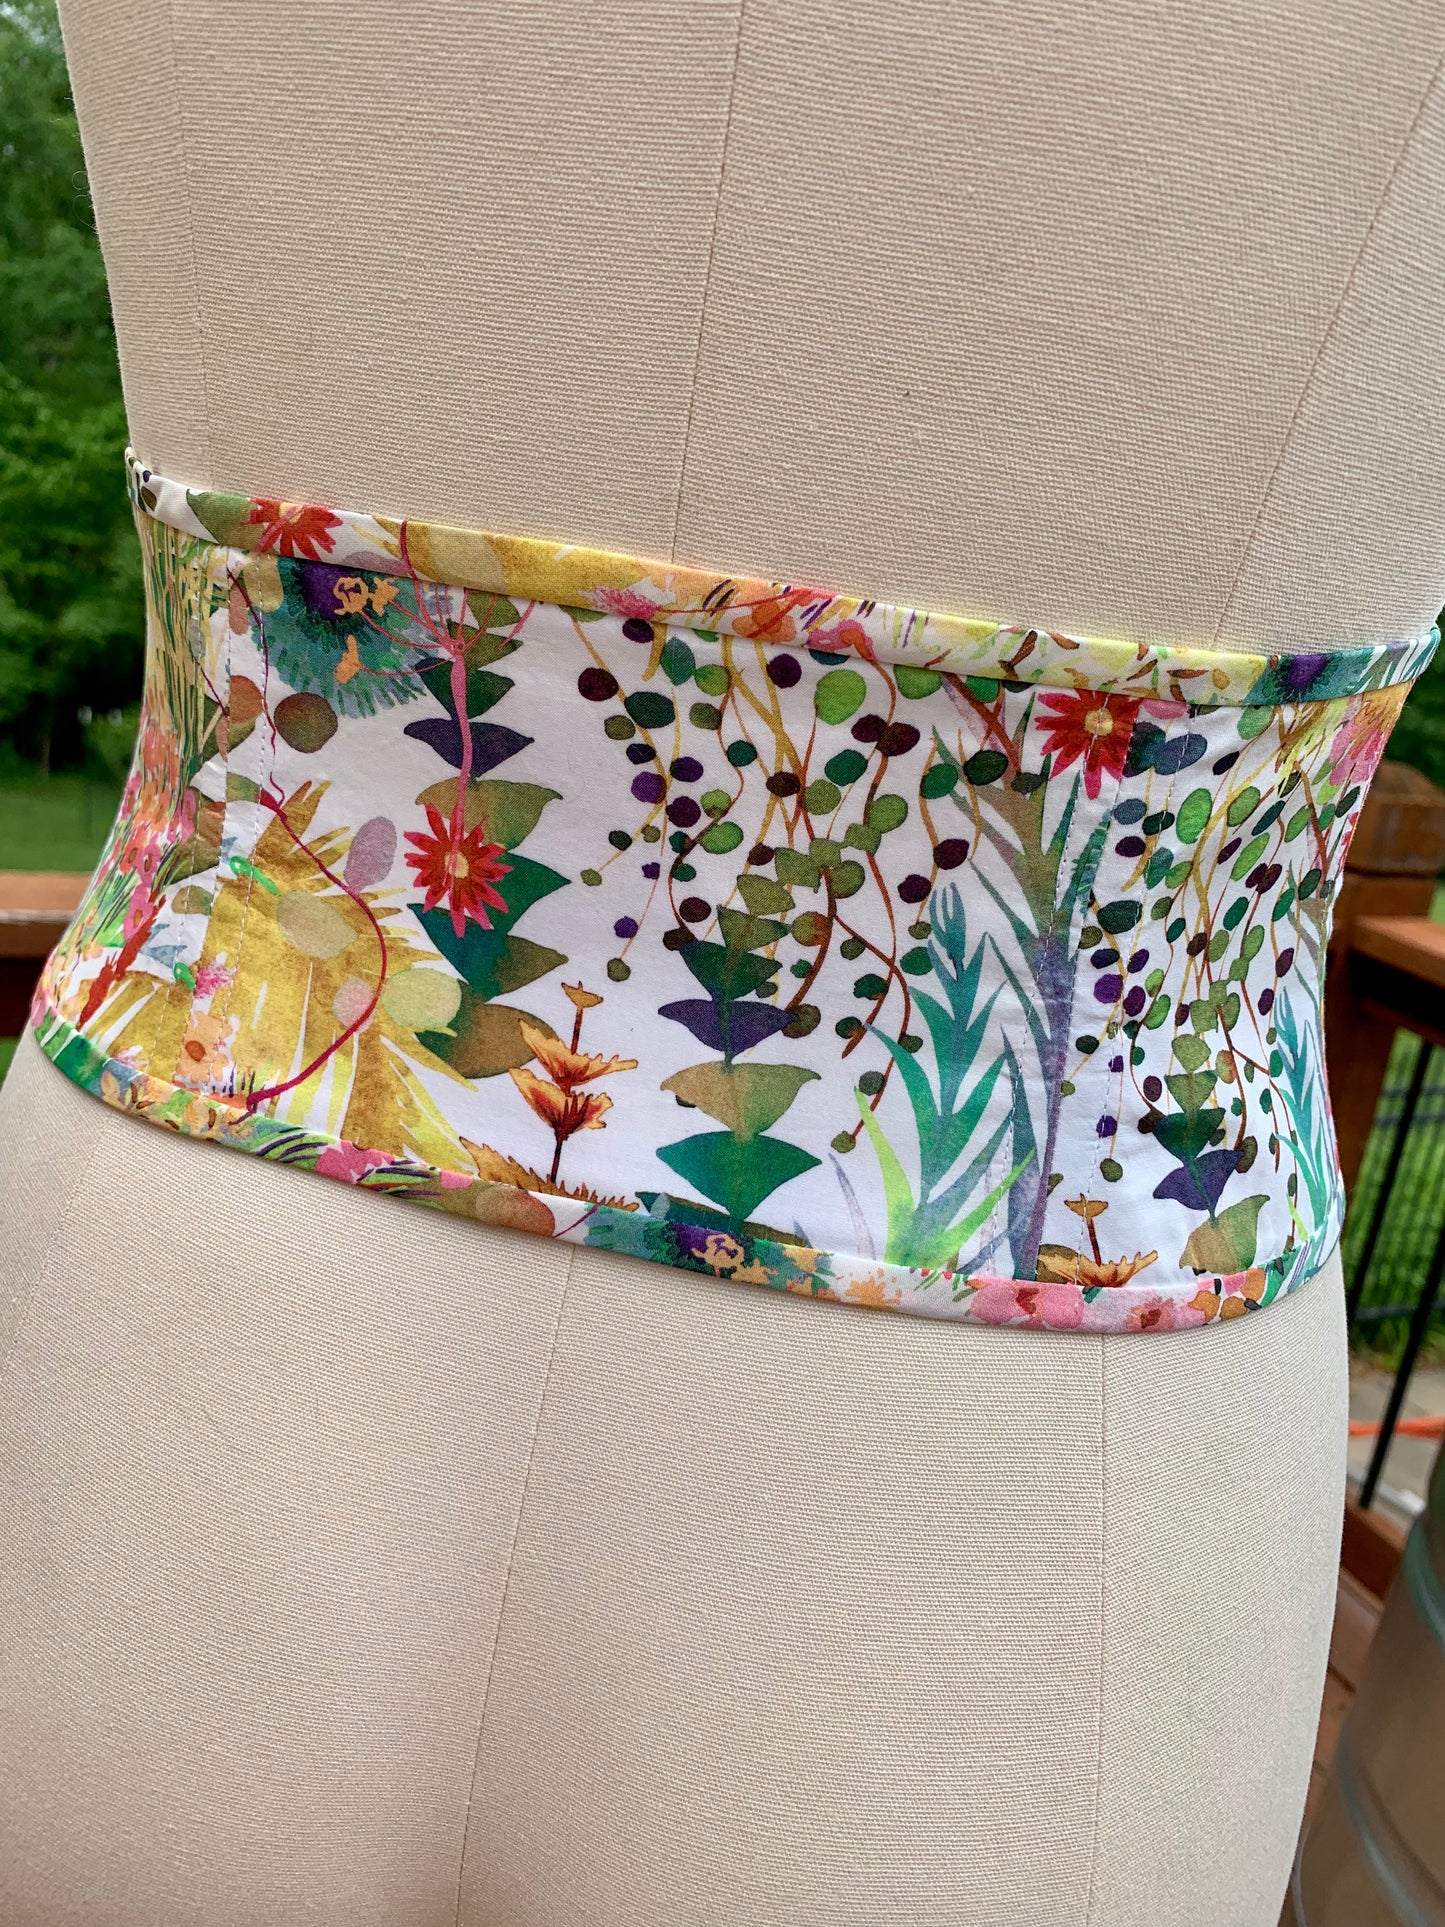 Floral Garden Corset Waist Belt - Available in 12 different sizes